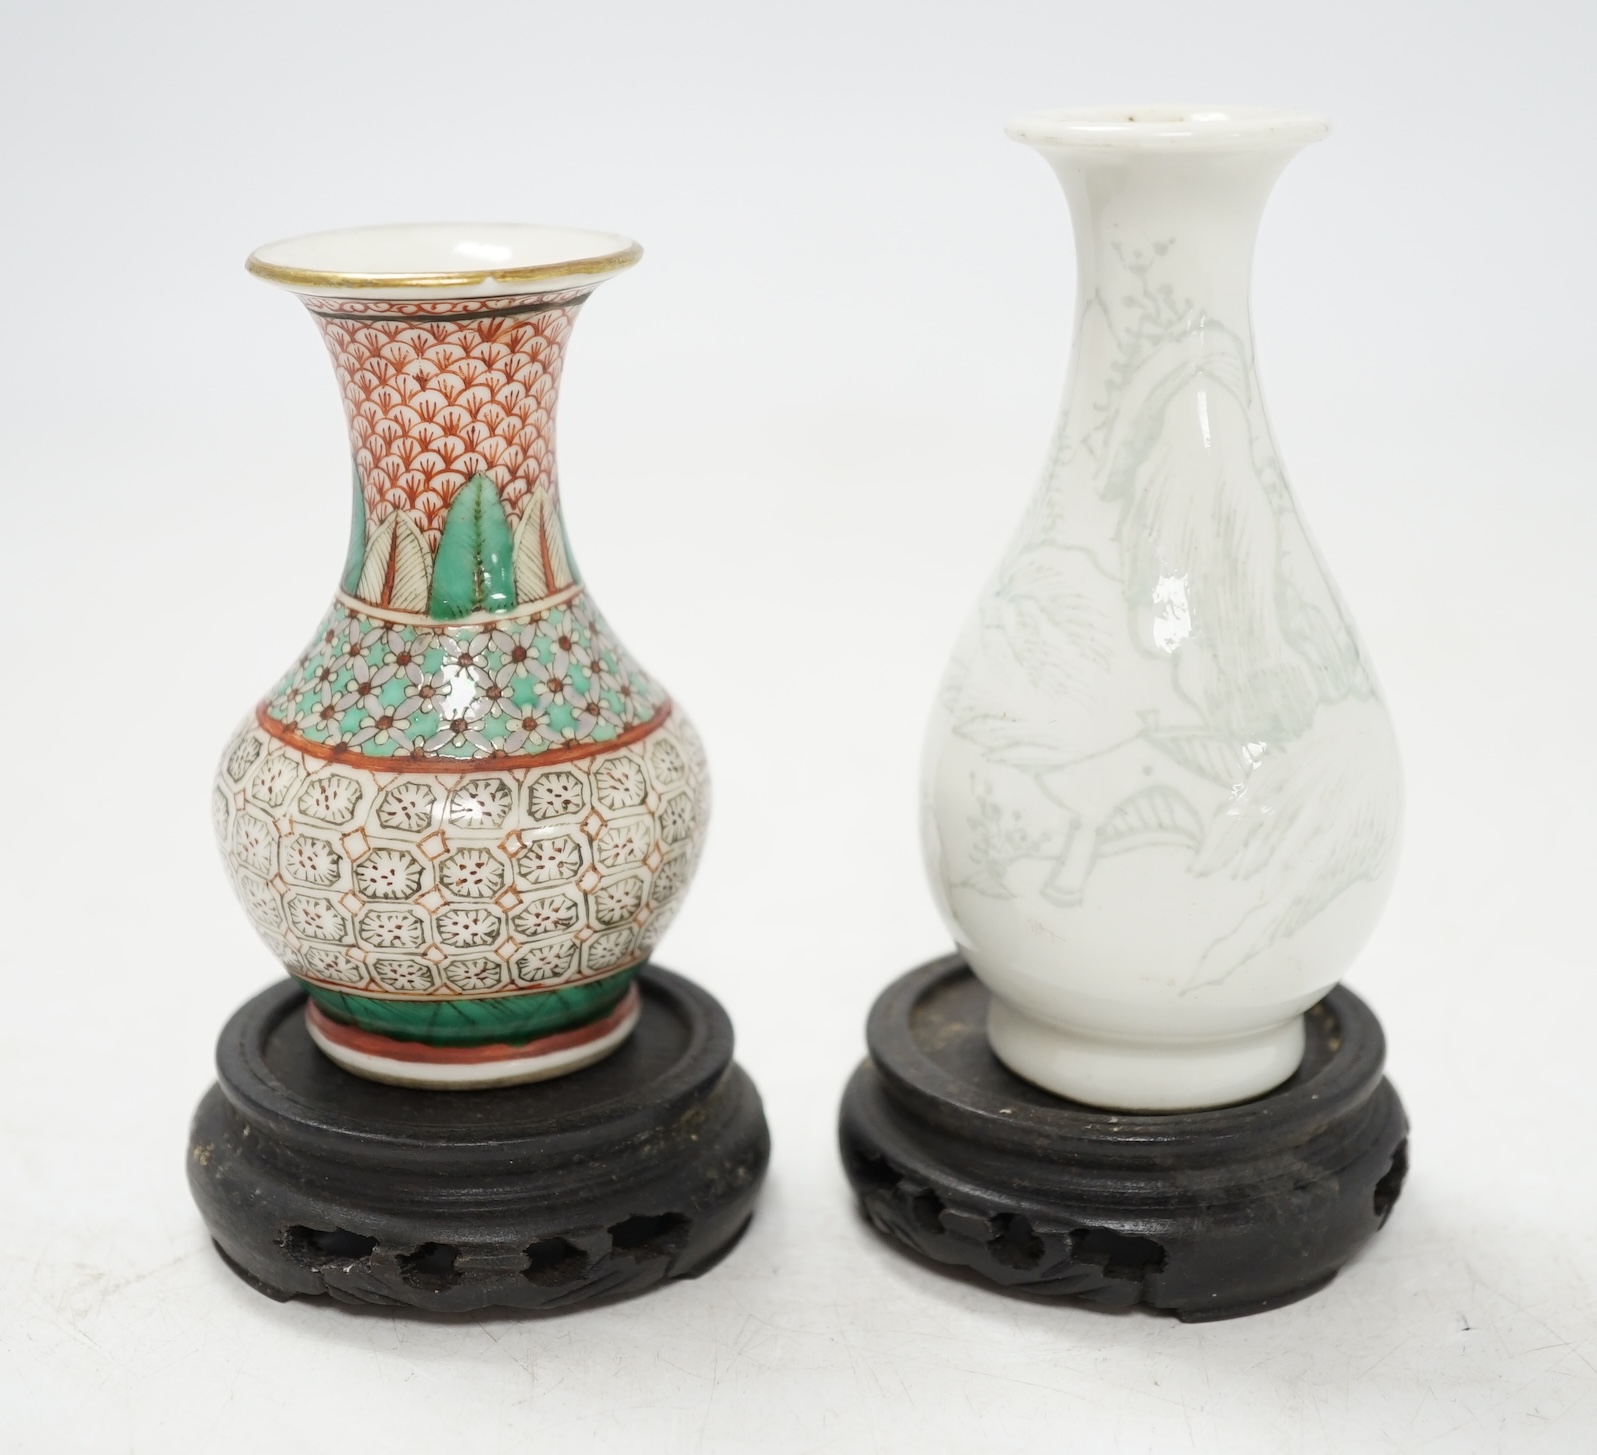 Two miniature Chinese porcelain vases, on hardwood stands, largest 9cm high. Condition - fair